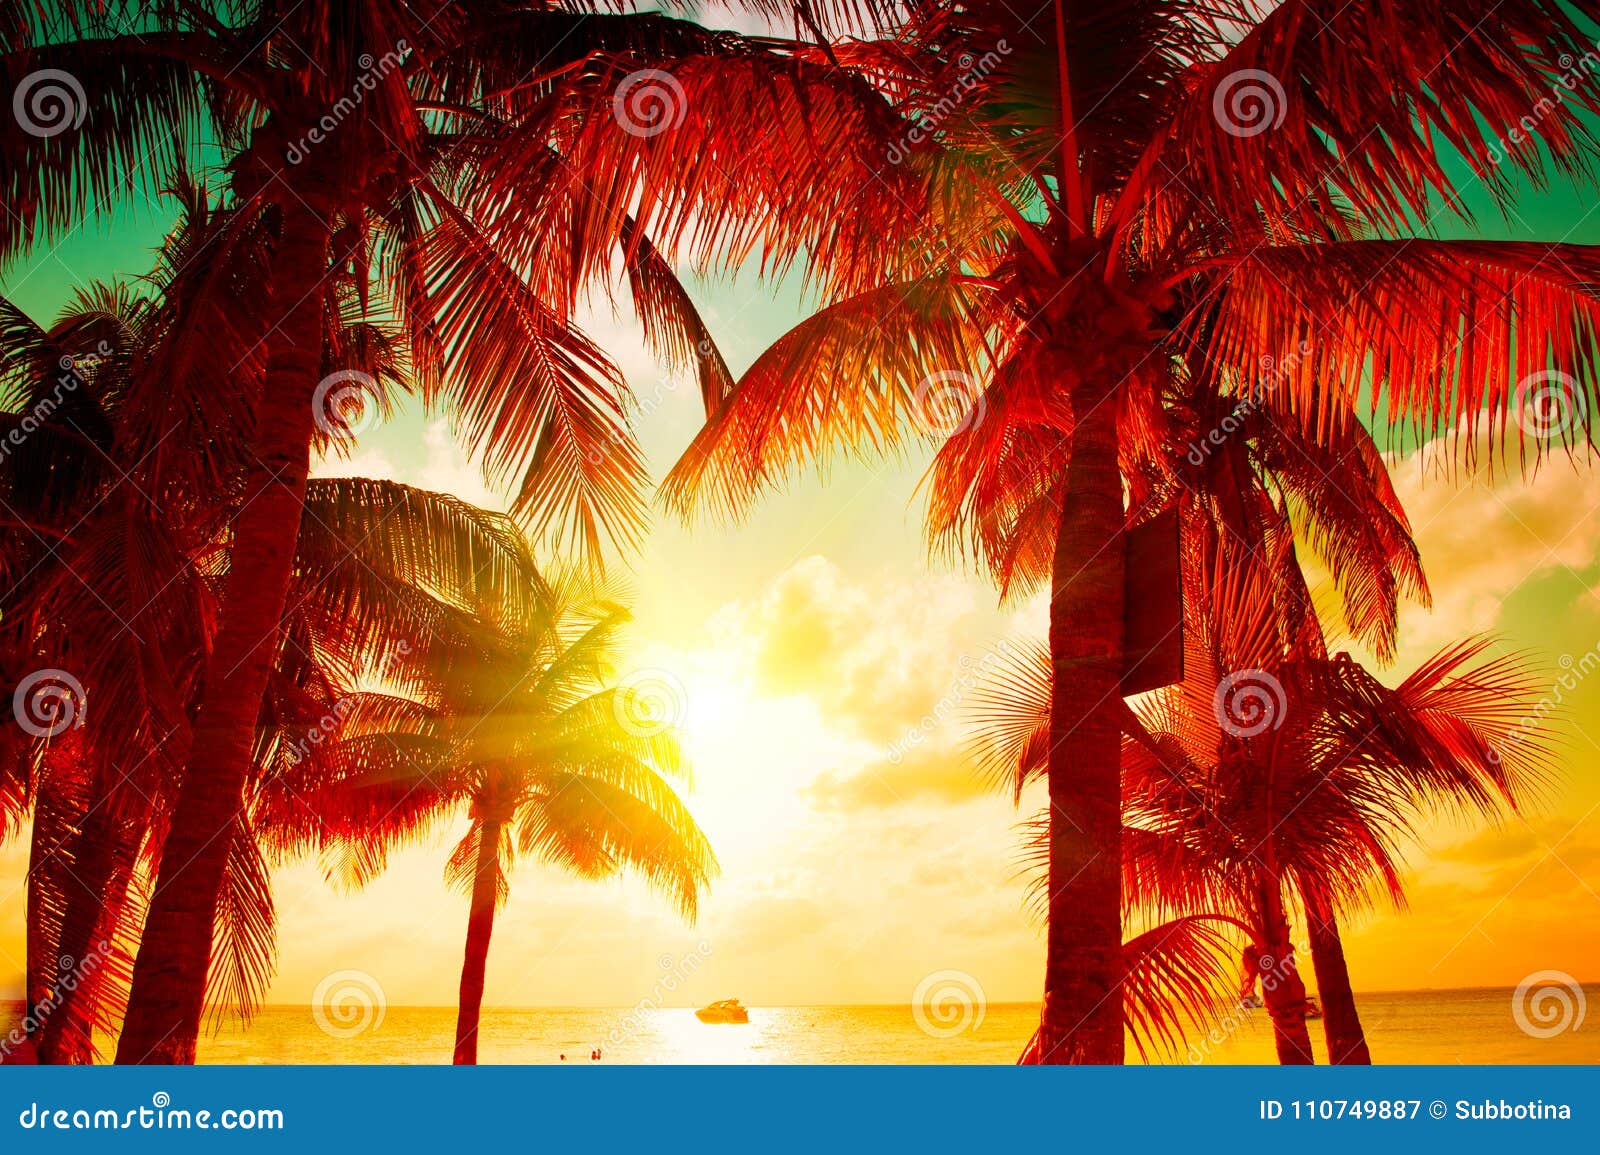 sunset beach with tropical palm tree over beautiful sky. palms and beautiful sky background. tourism, vacation concept backdrop